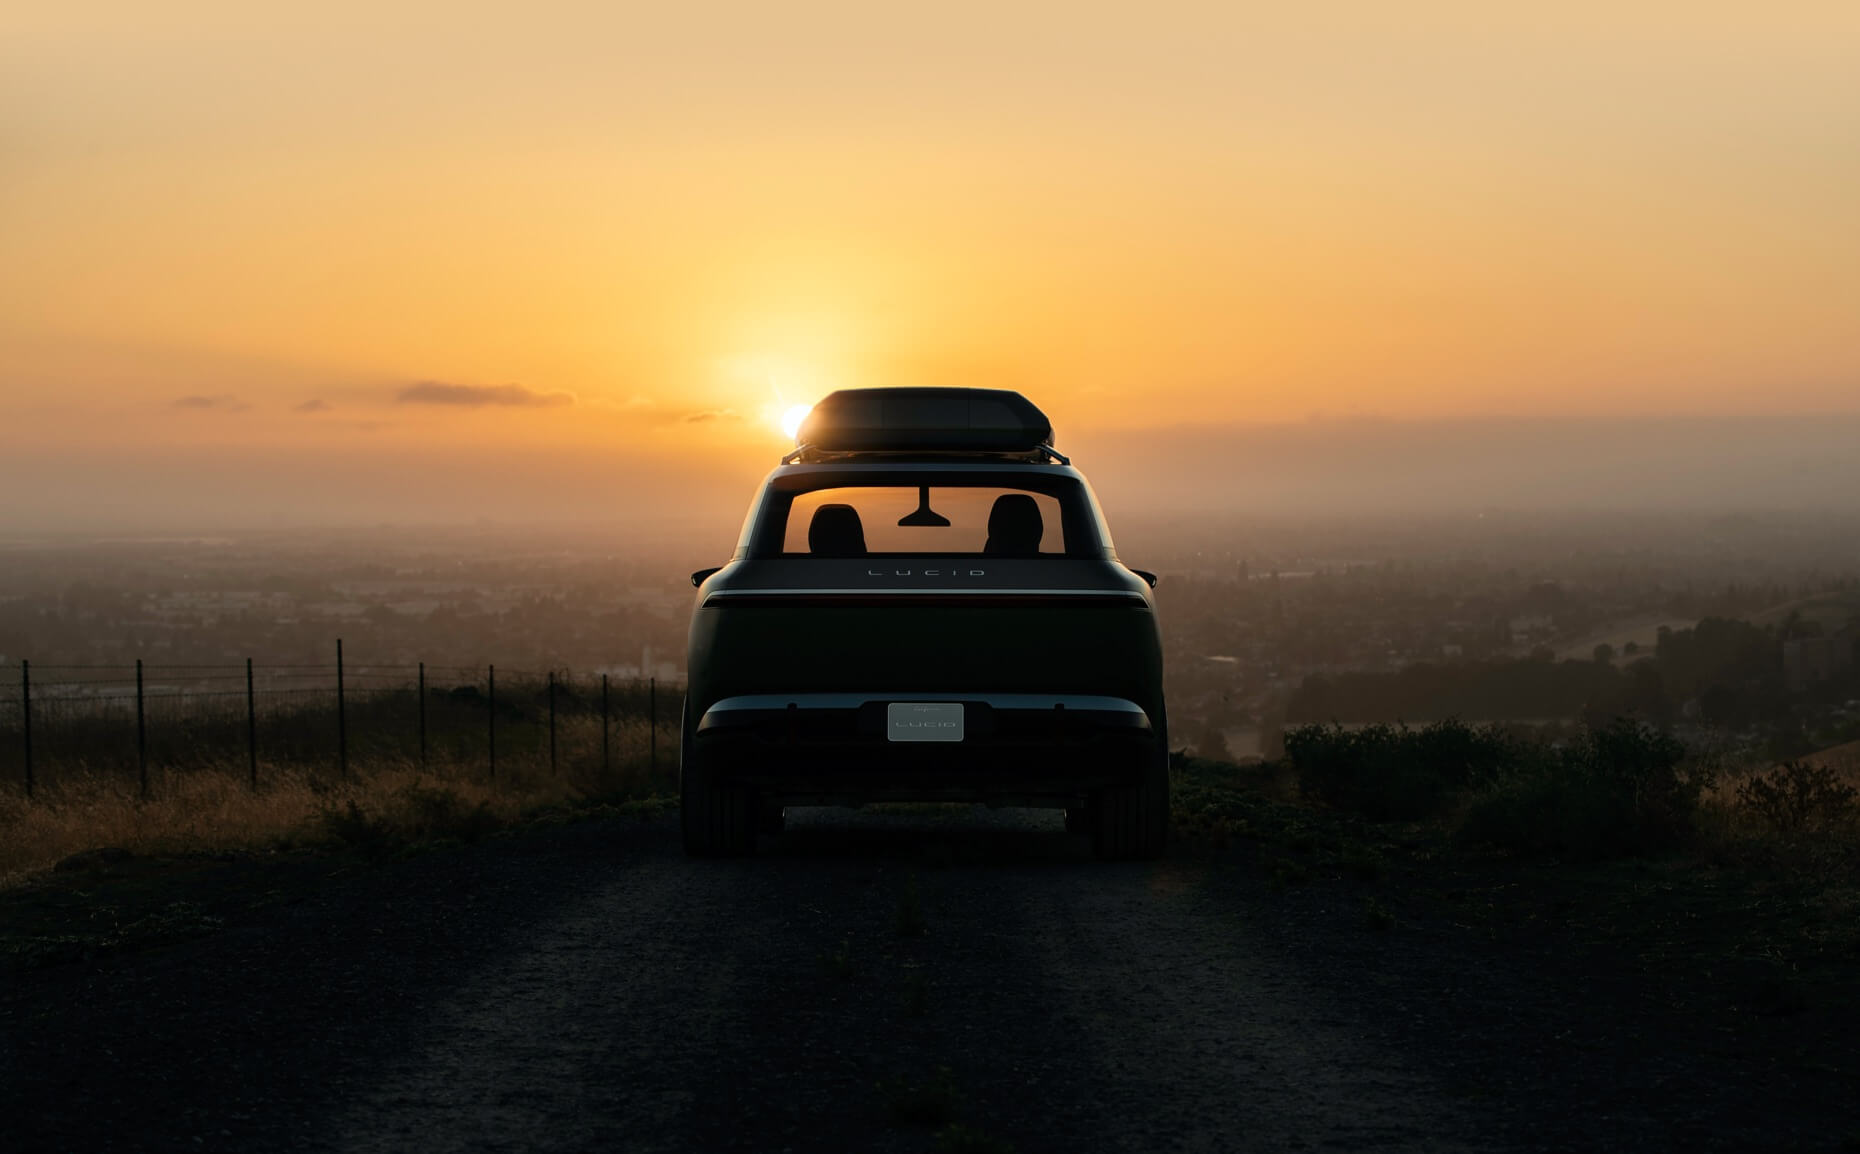 Rear view of Lucid Gravity electric crossover SUV with the sunset in the background